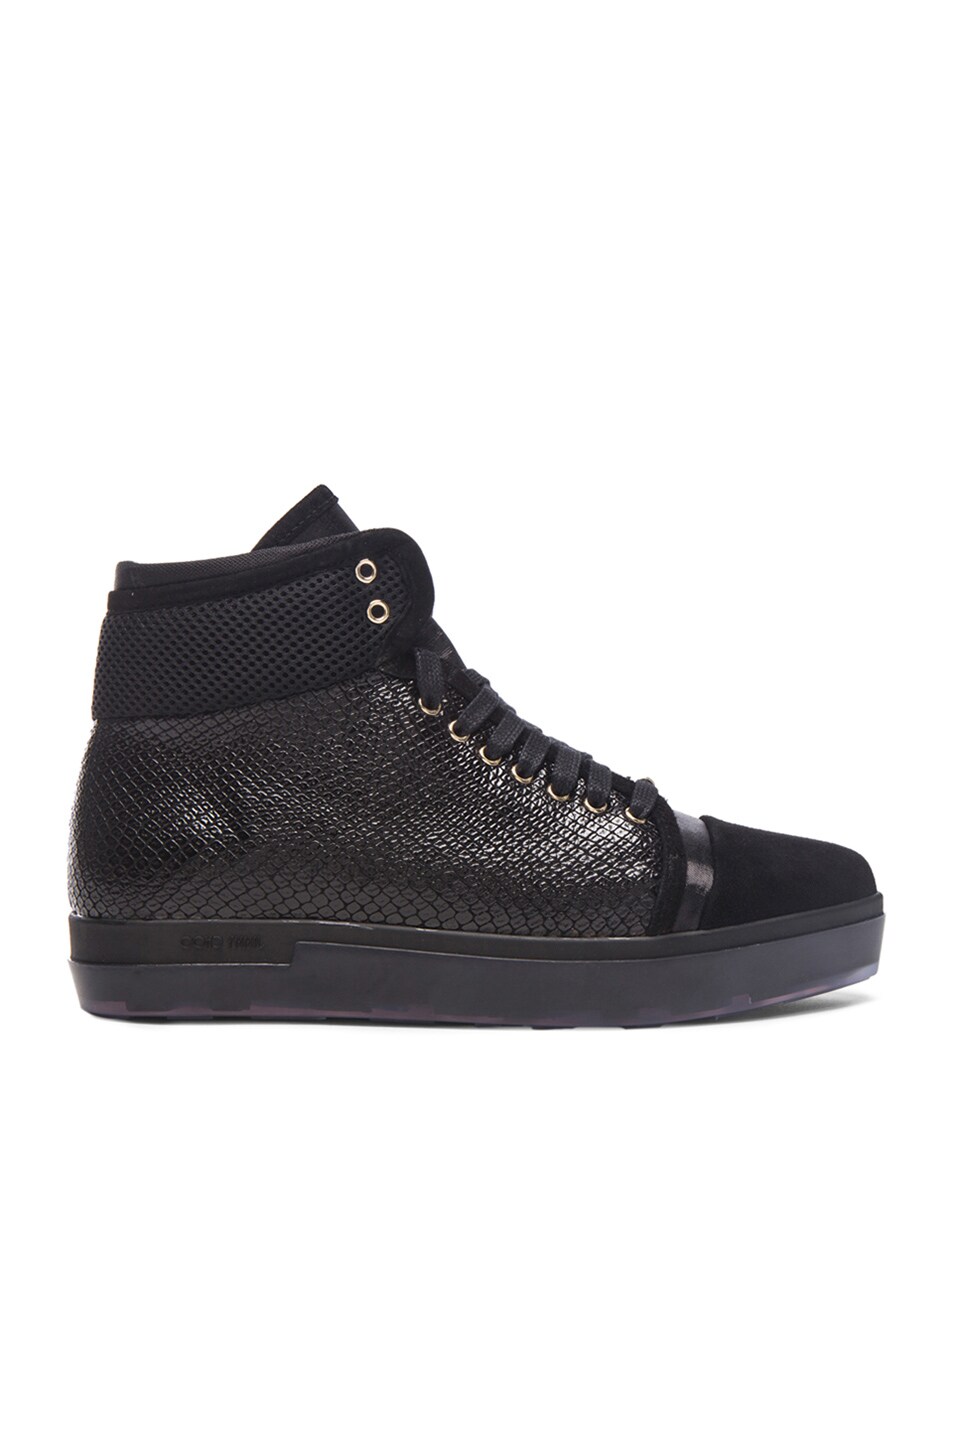 Image 1 of Jimmy Choo Bronx Pointy High Top Leather Sneakers in Black